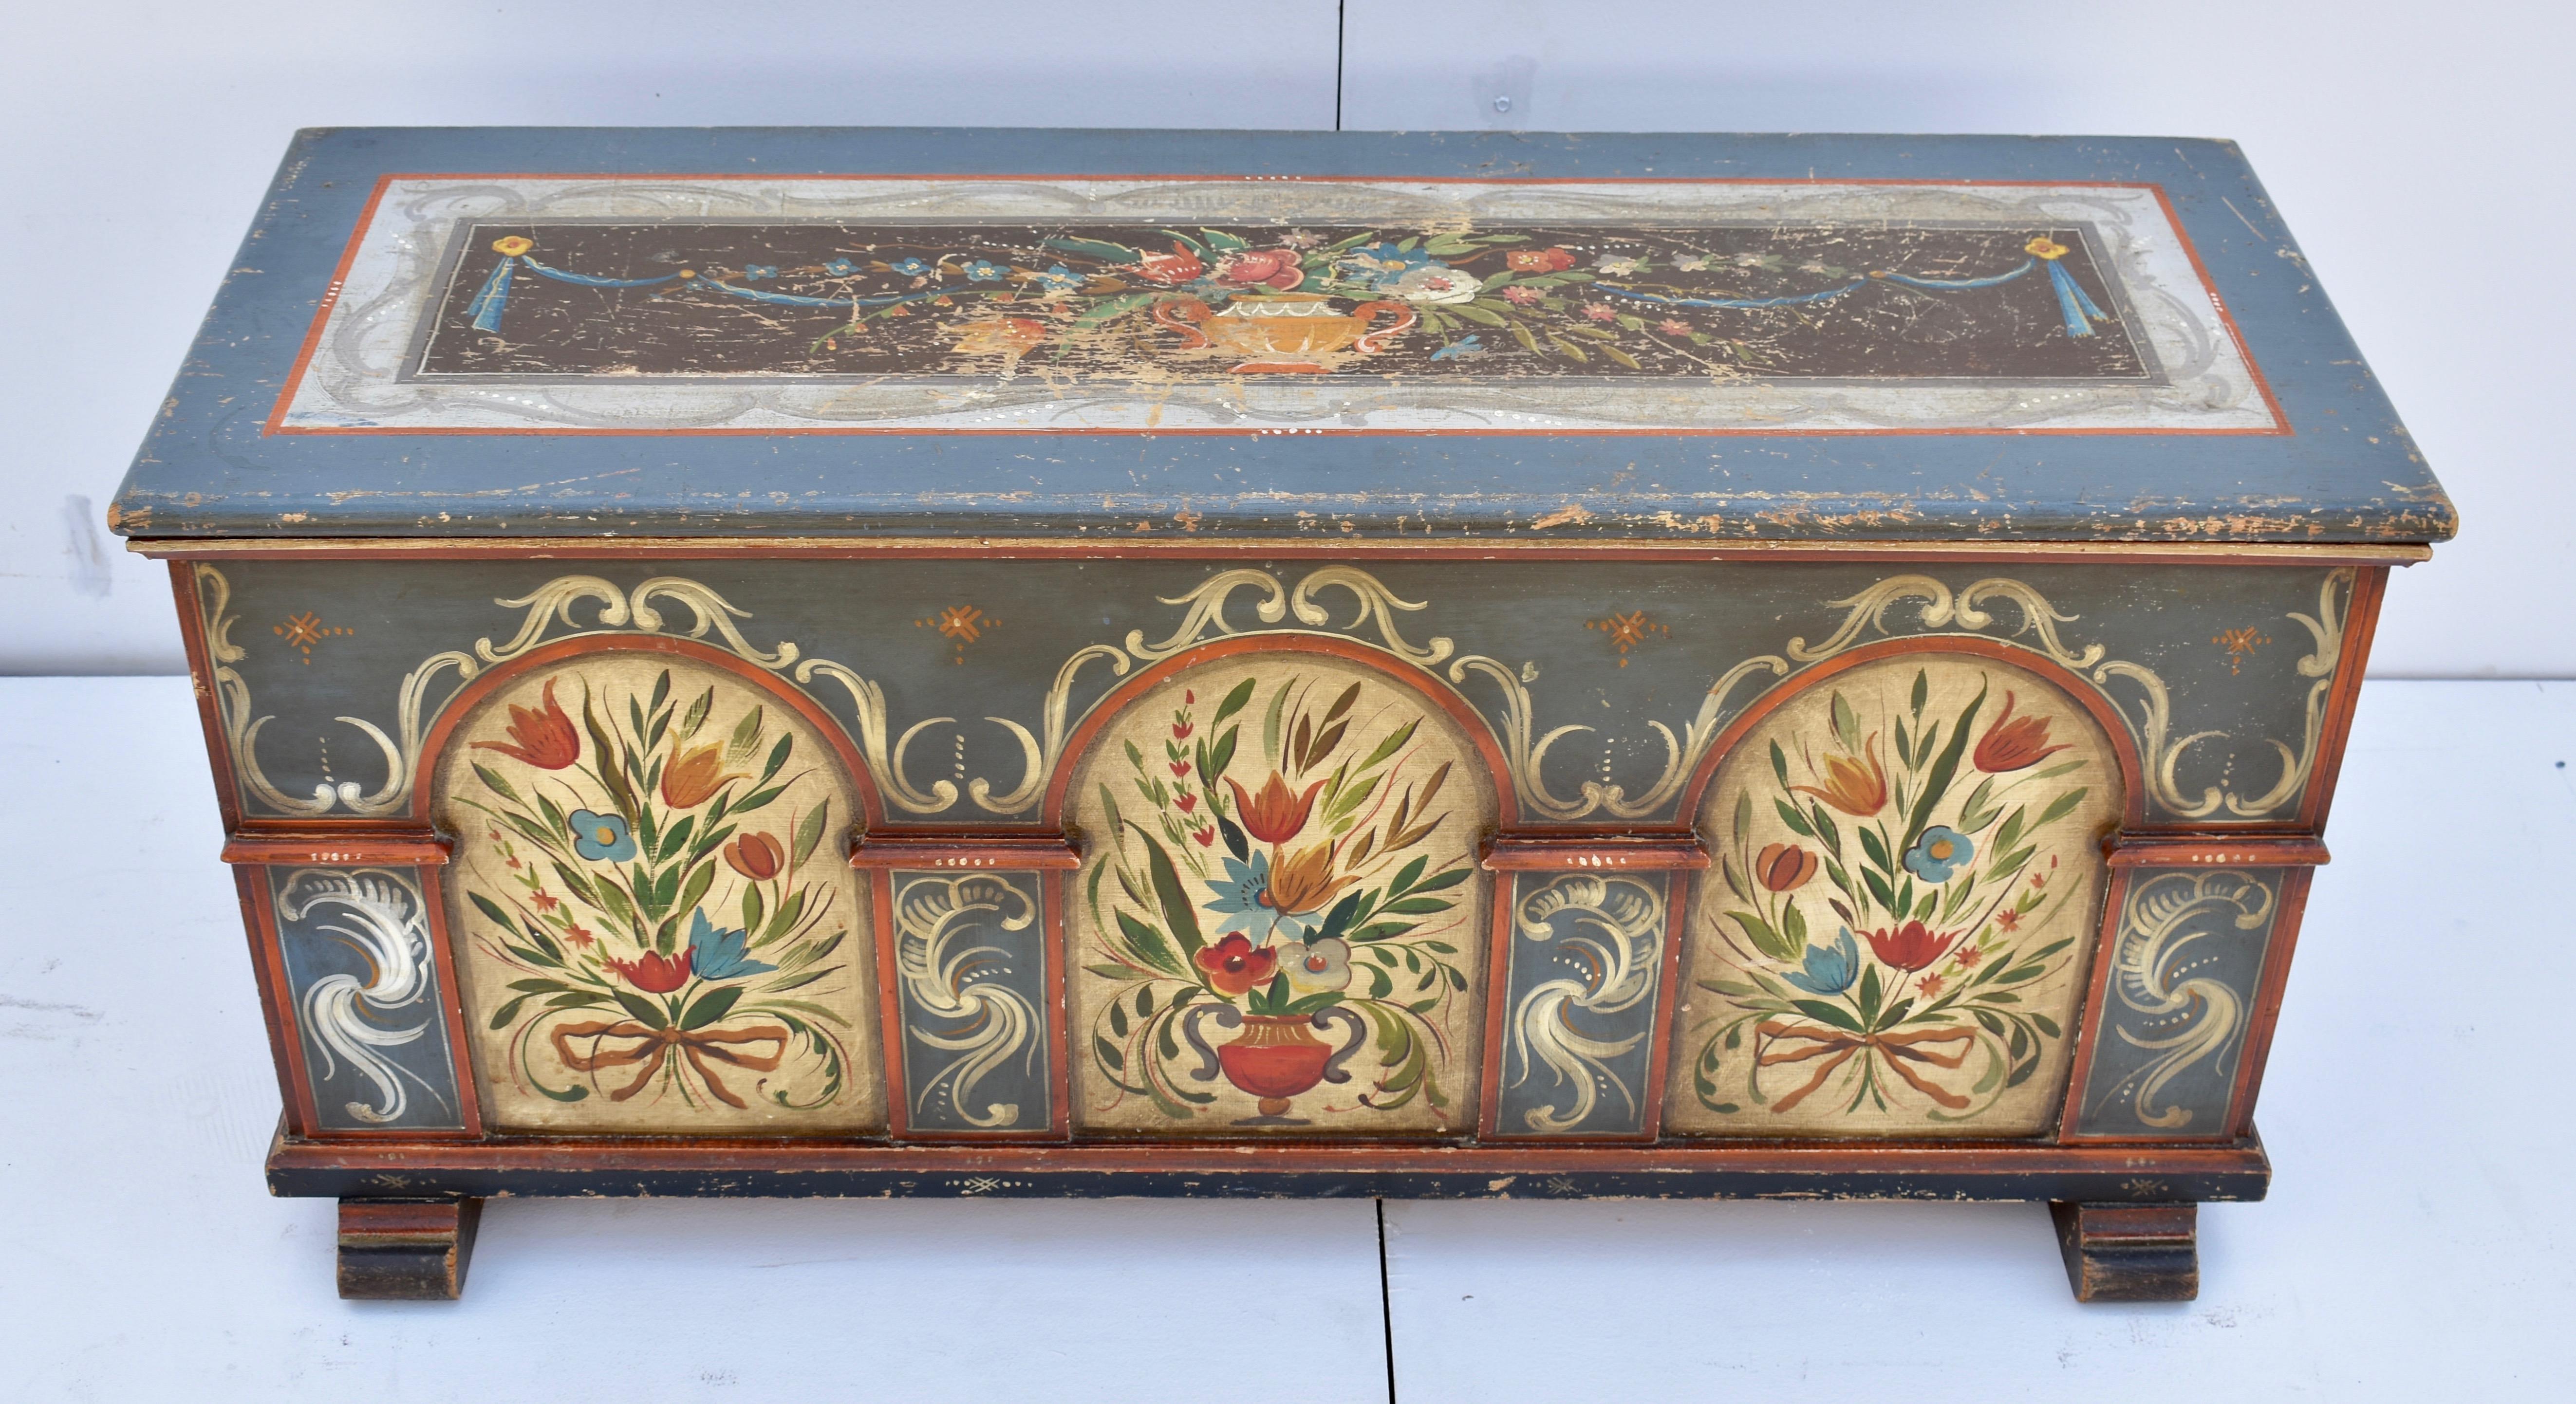 Though it is not a genuine period piece, this mid-twentieth century blanket chest is made in the old way and employs an energetic interpretation of traditional central European design motifs. On the sides, colorful ribbon-tied bouquets on a dark